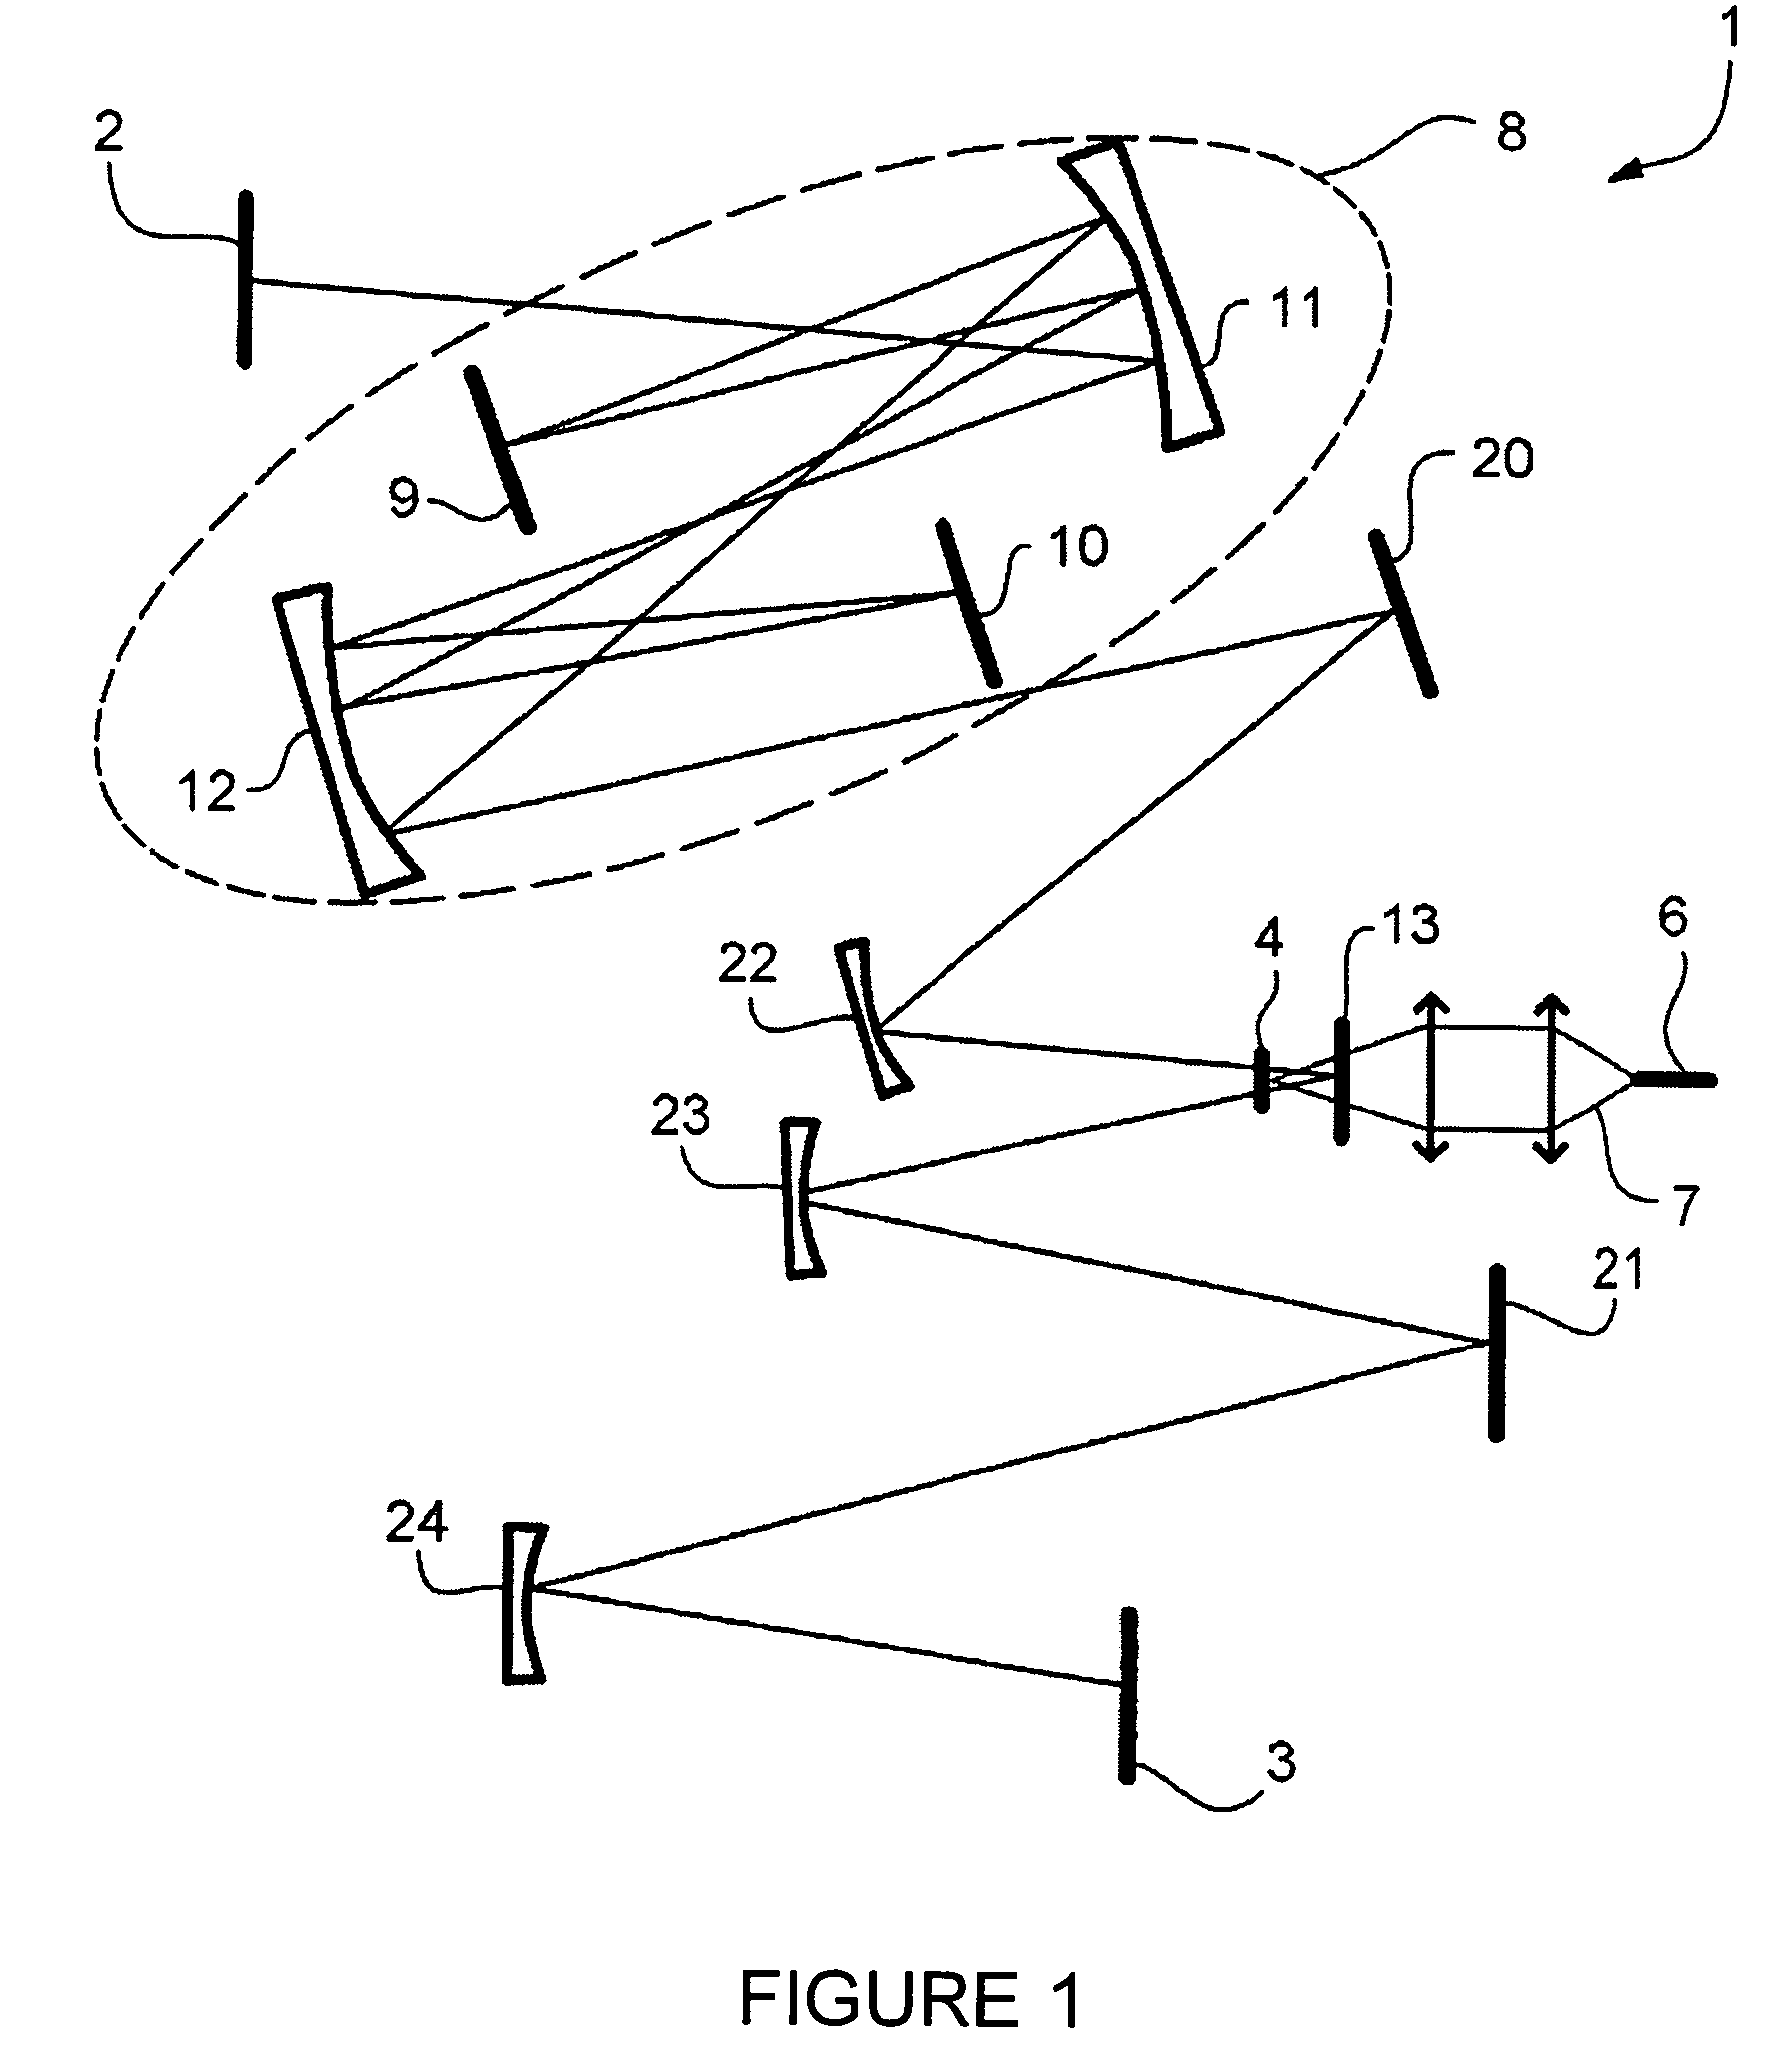 Ultra-short laser source with rare earth ions and stable pulse train and device for lengthening a laser cavity